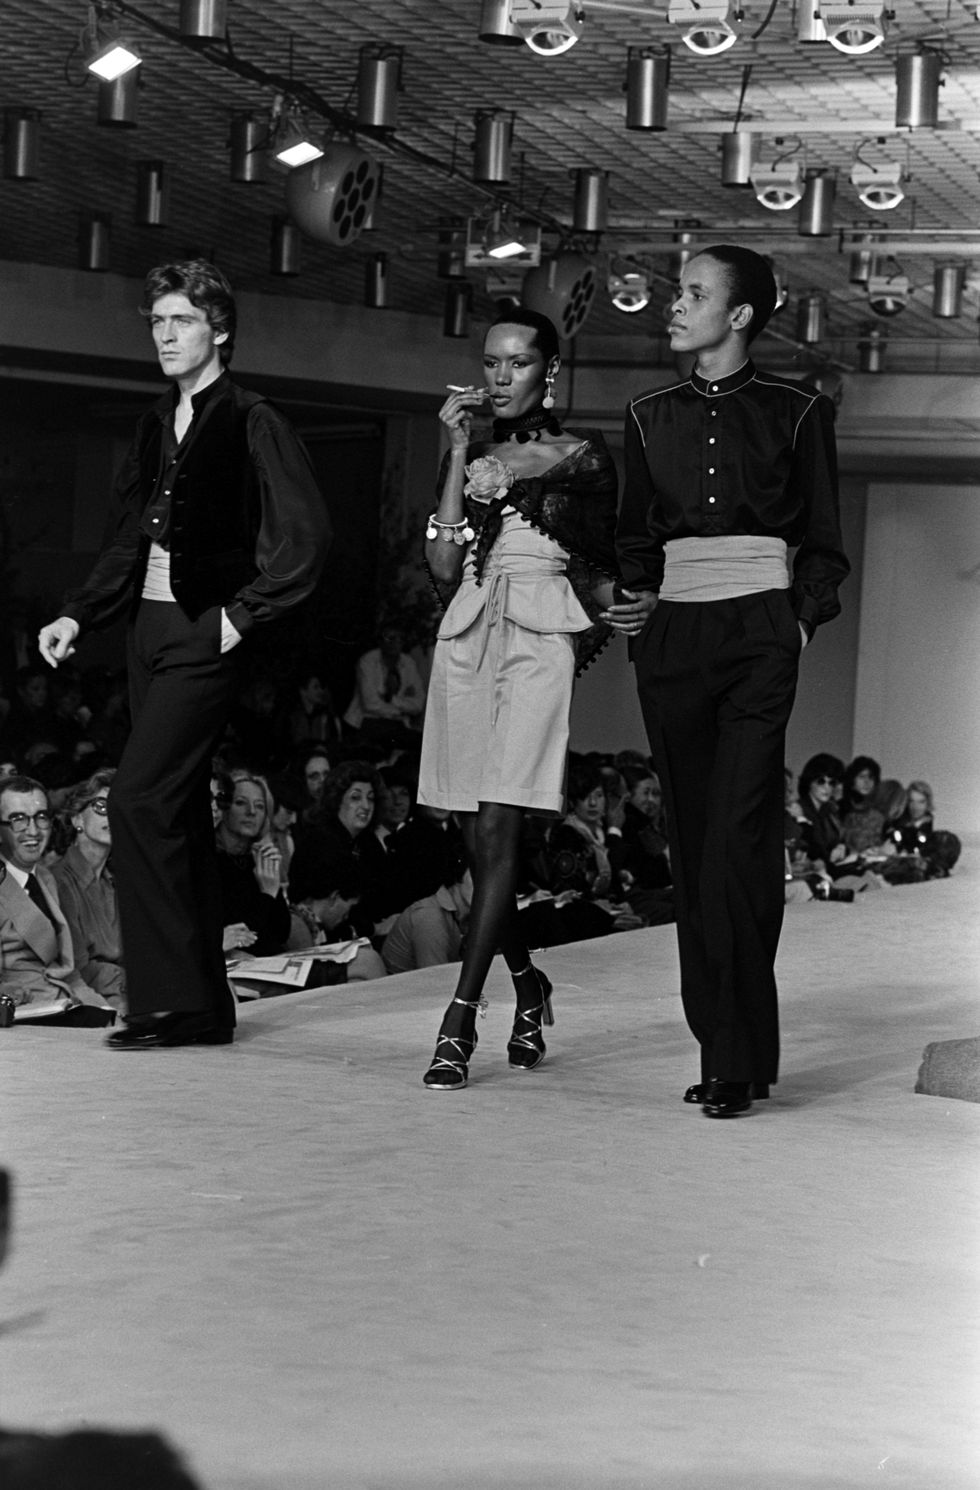 yves saint laurent spring 1977 menswear collection runway show 25 oct 1976